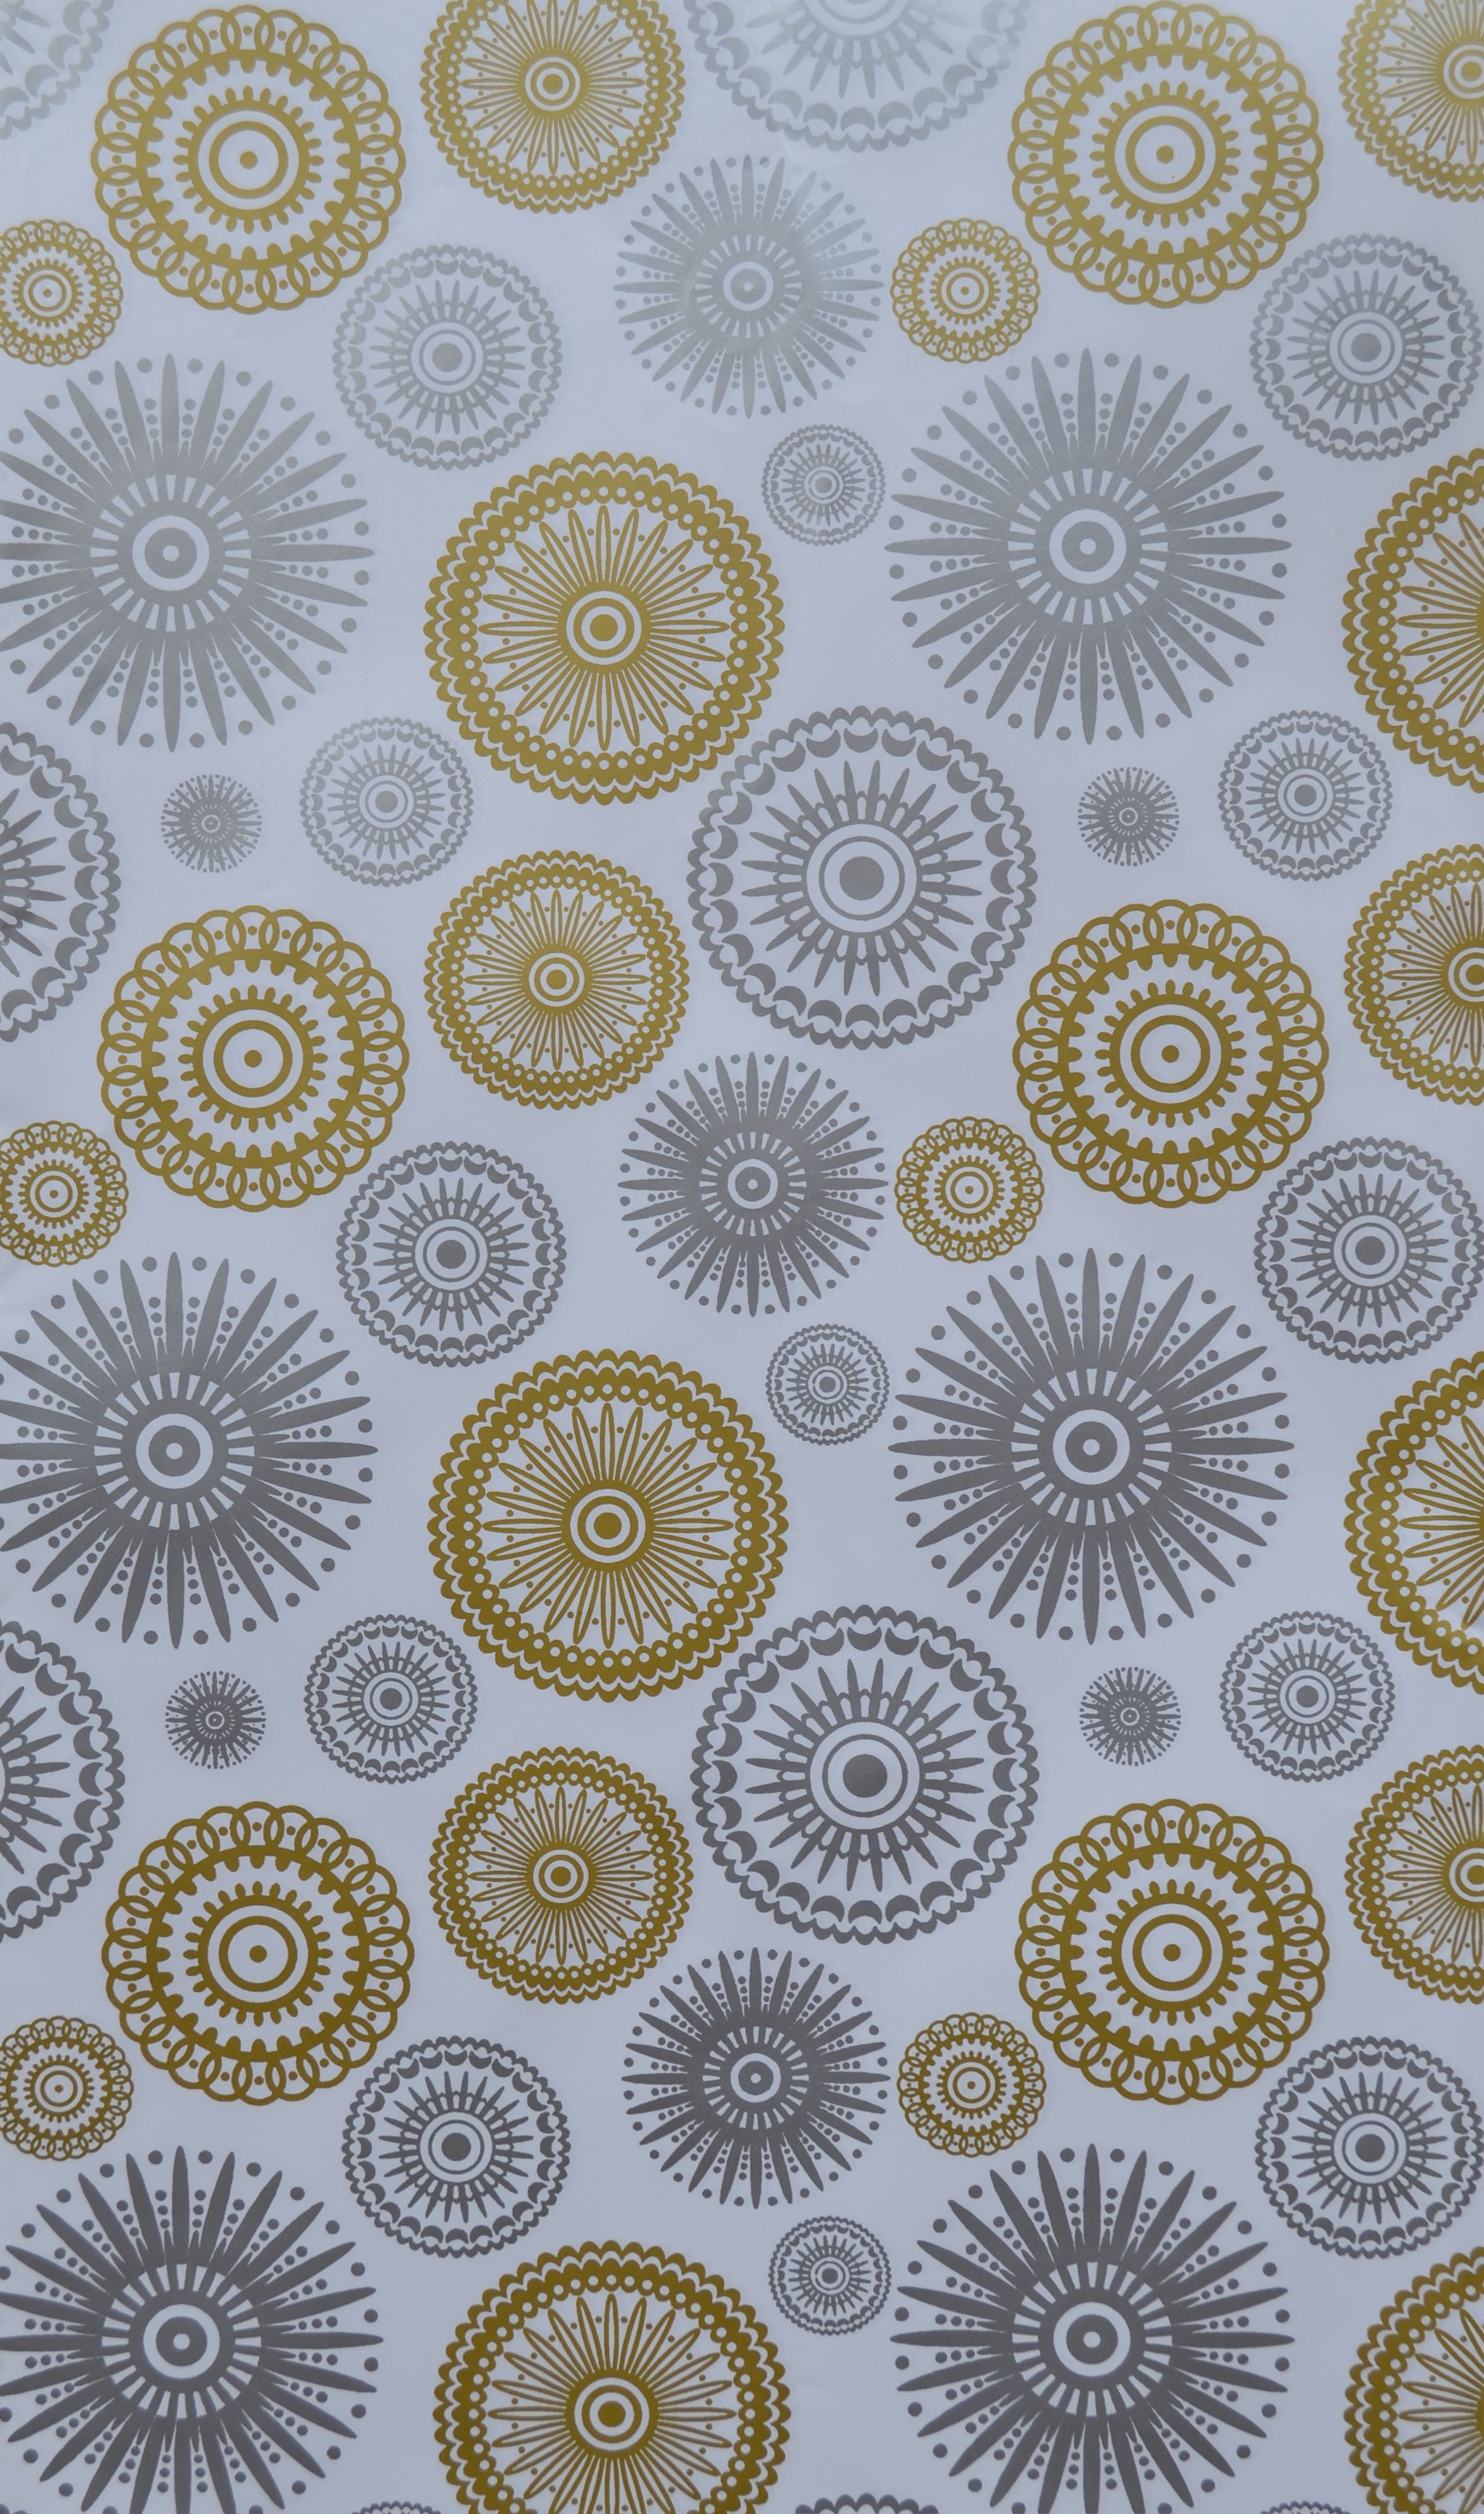 Gift wrapping Paper (Big Circles Design in Silver and Gold)